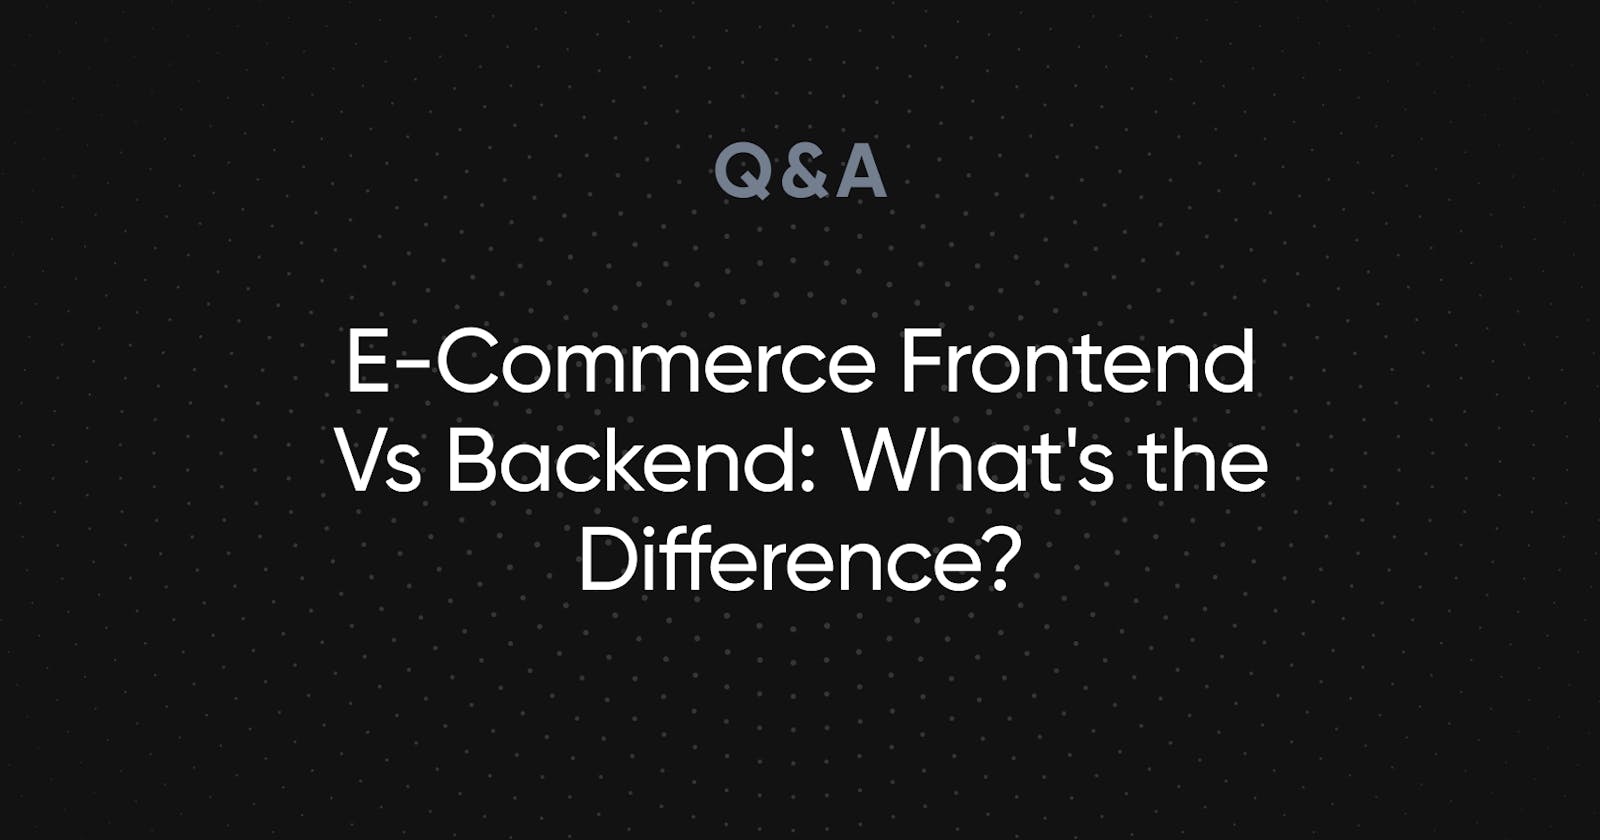 E-Commerce Frontend Vs Backend: What's the Difference?